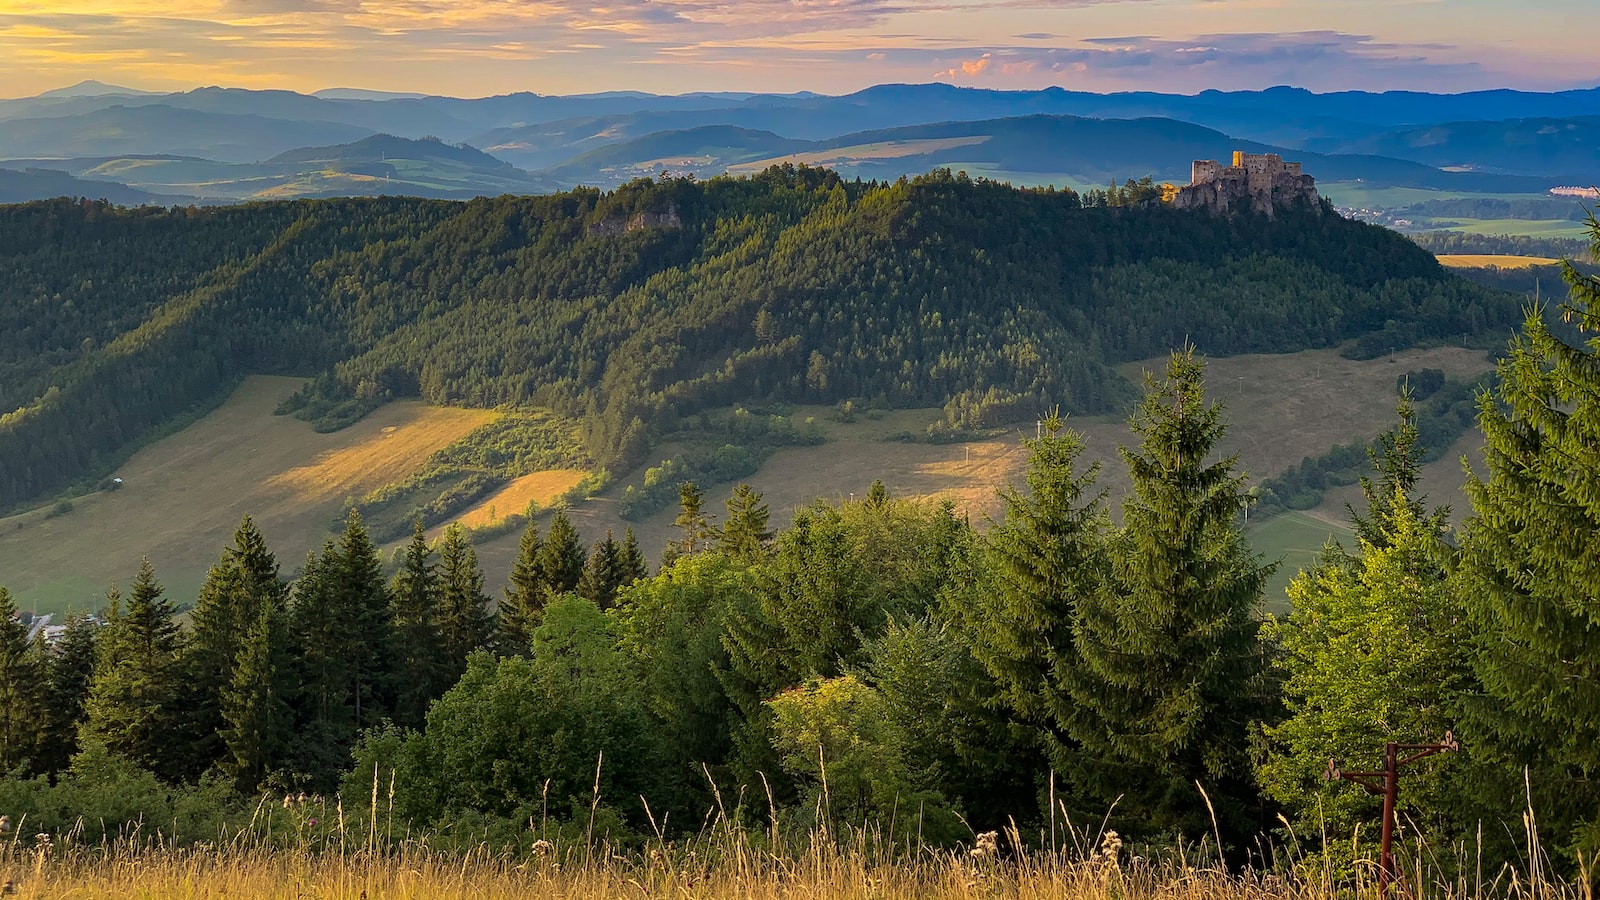 Embark on Memorable Hiking Trails amidst Slovakia's Untamed Wilderness